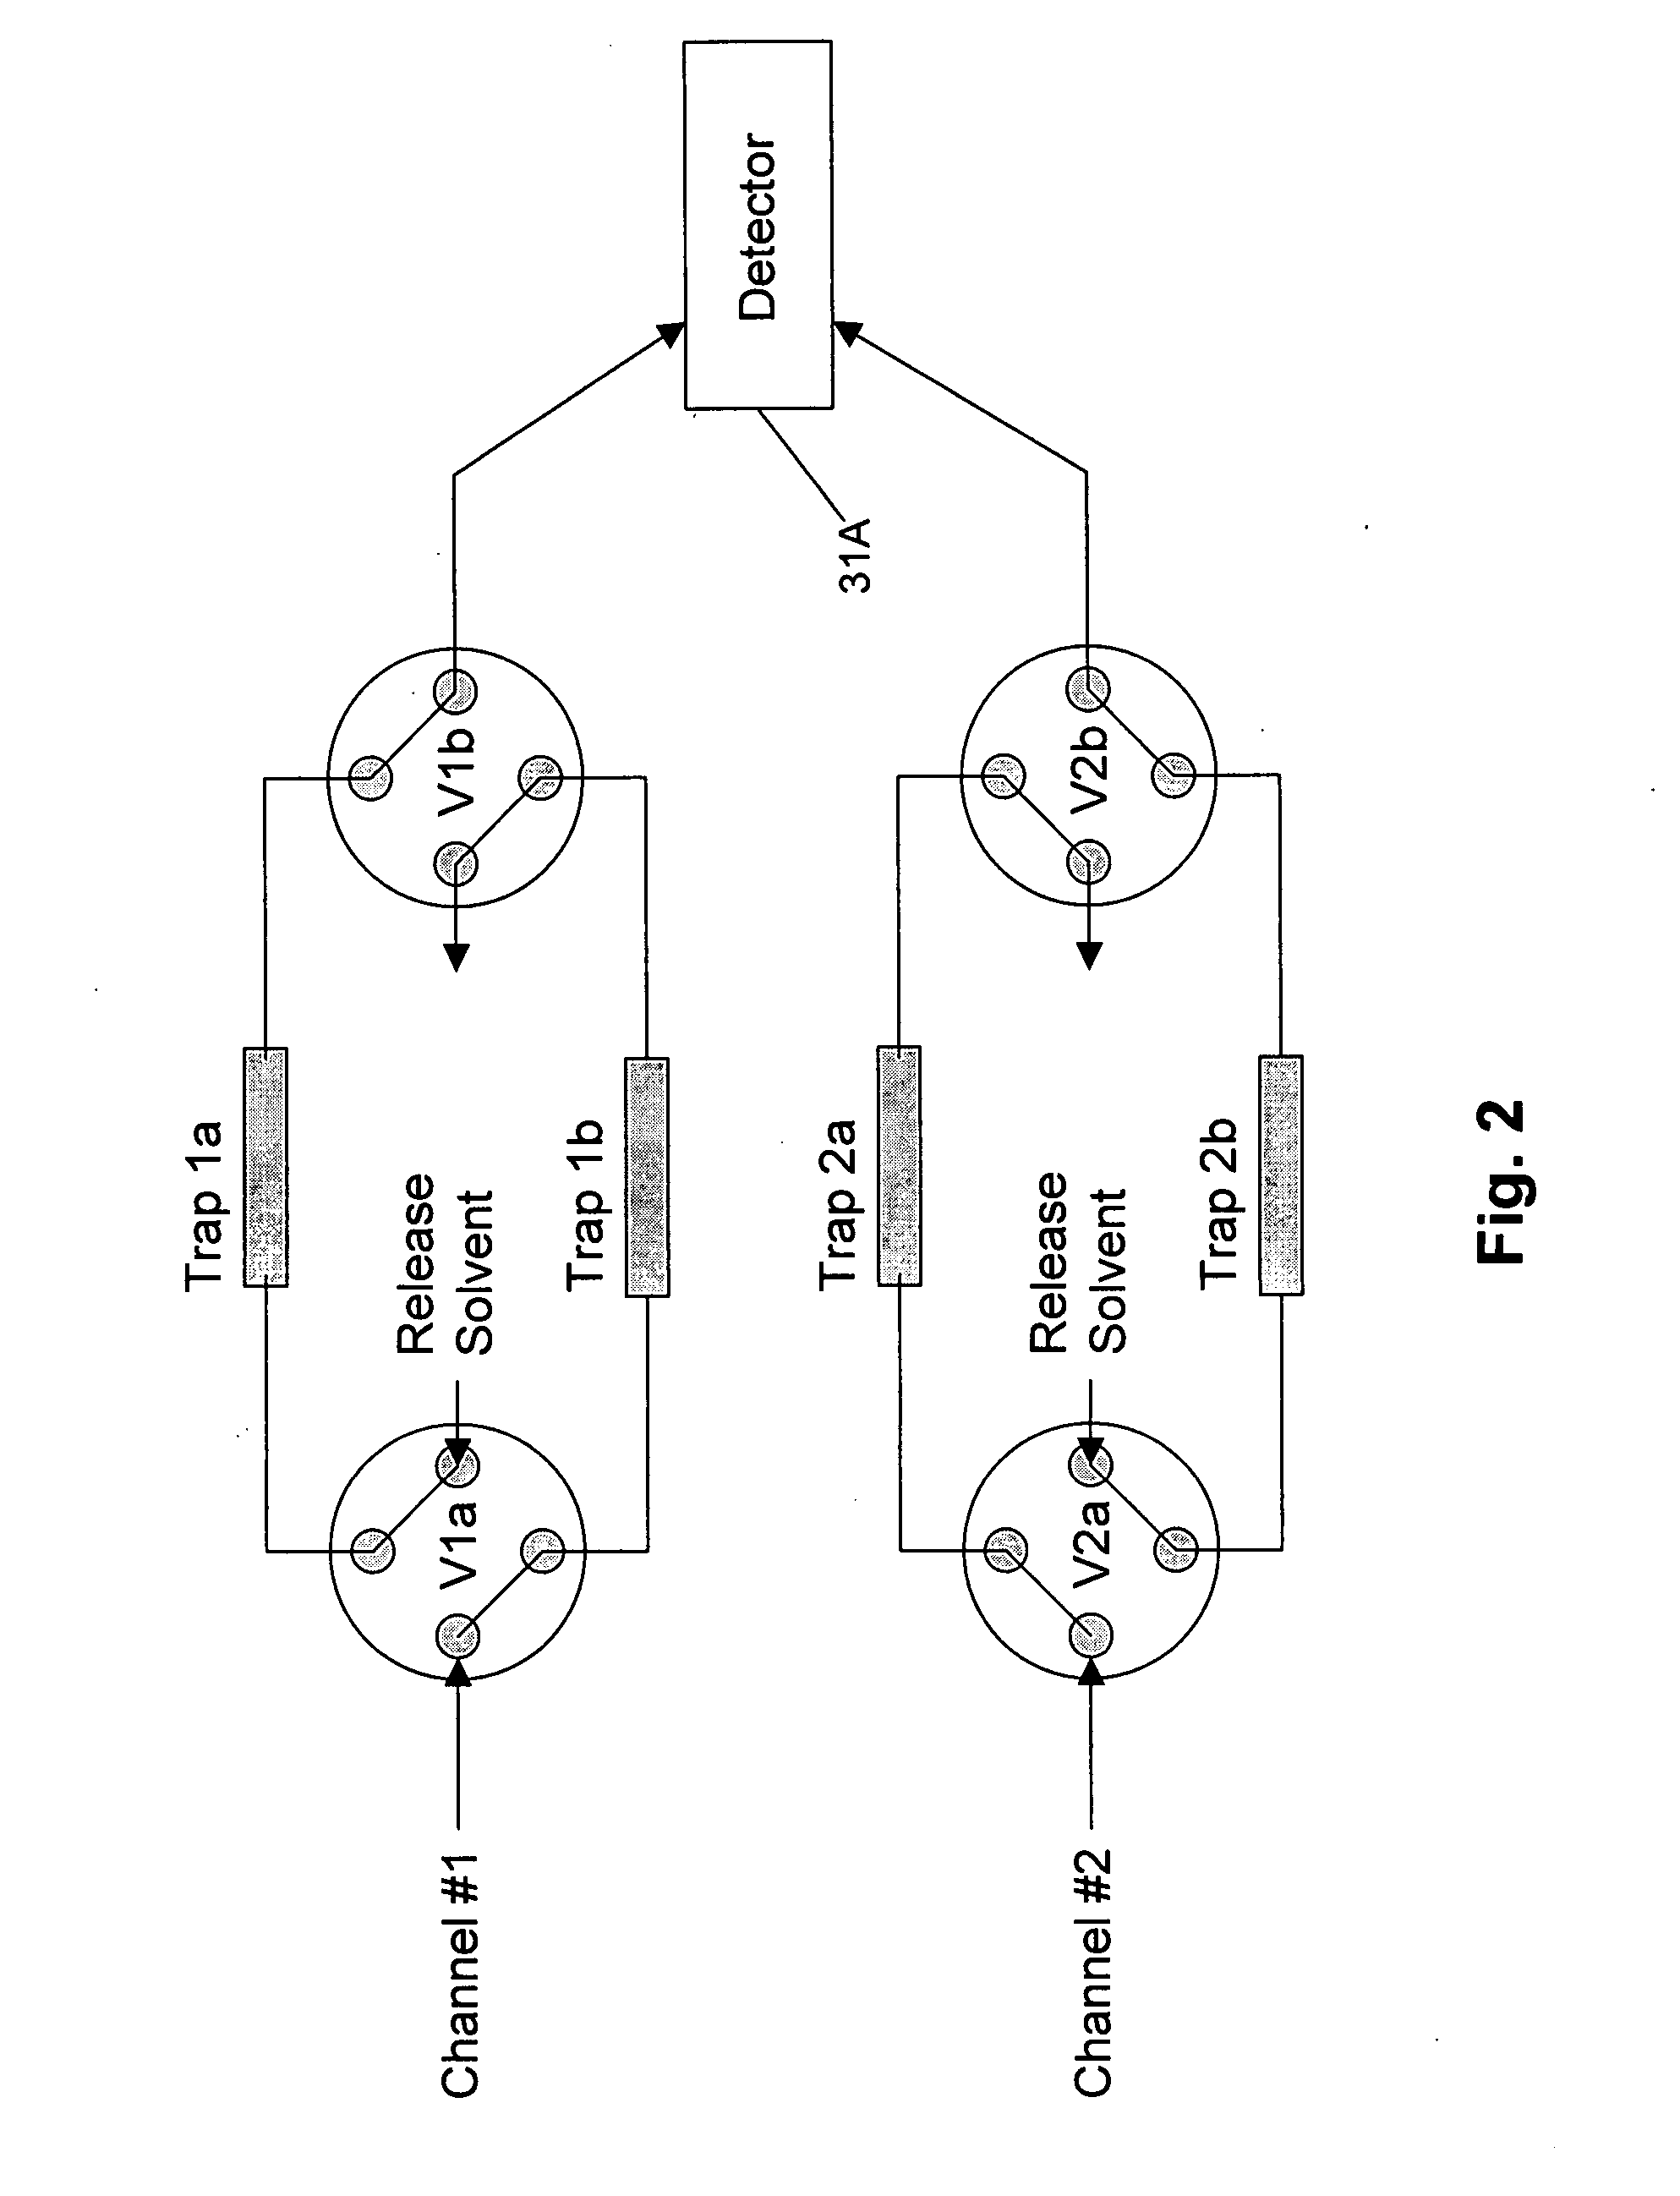 Multi-dimensional liquid chromatography separation system and method